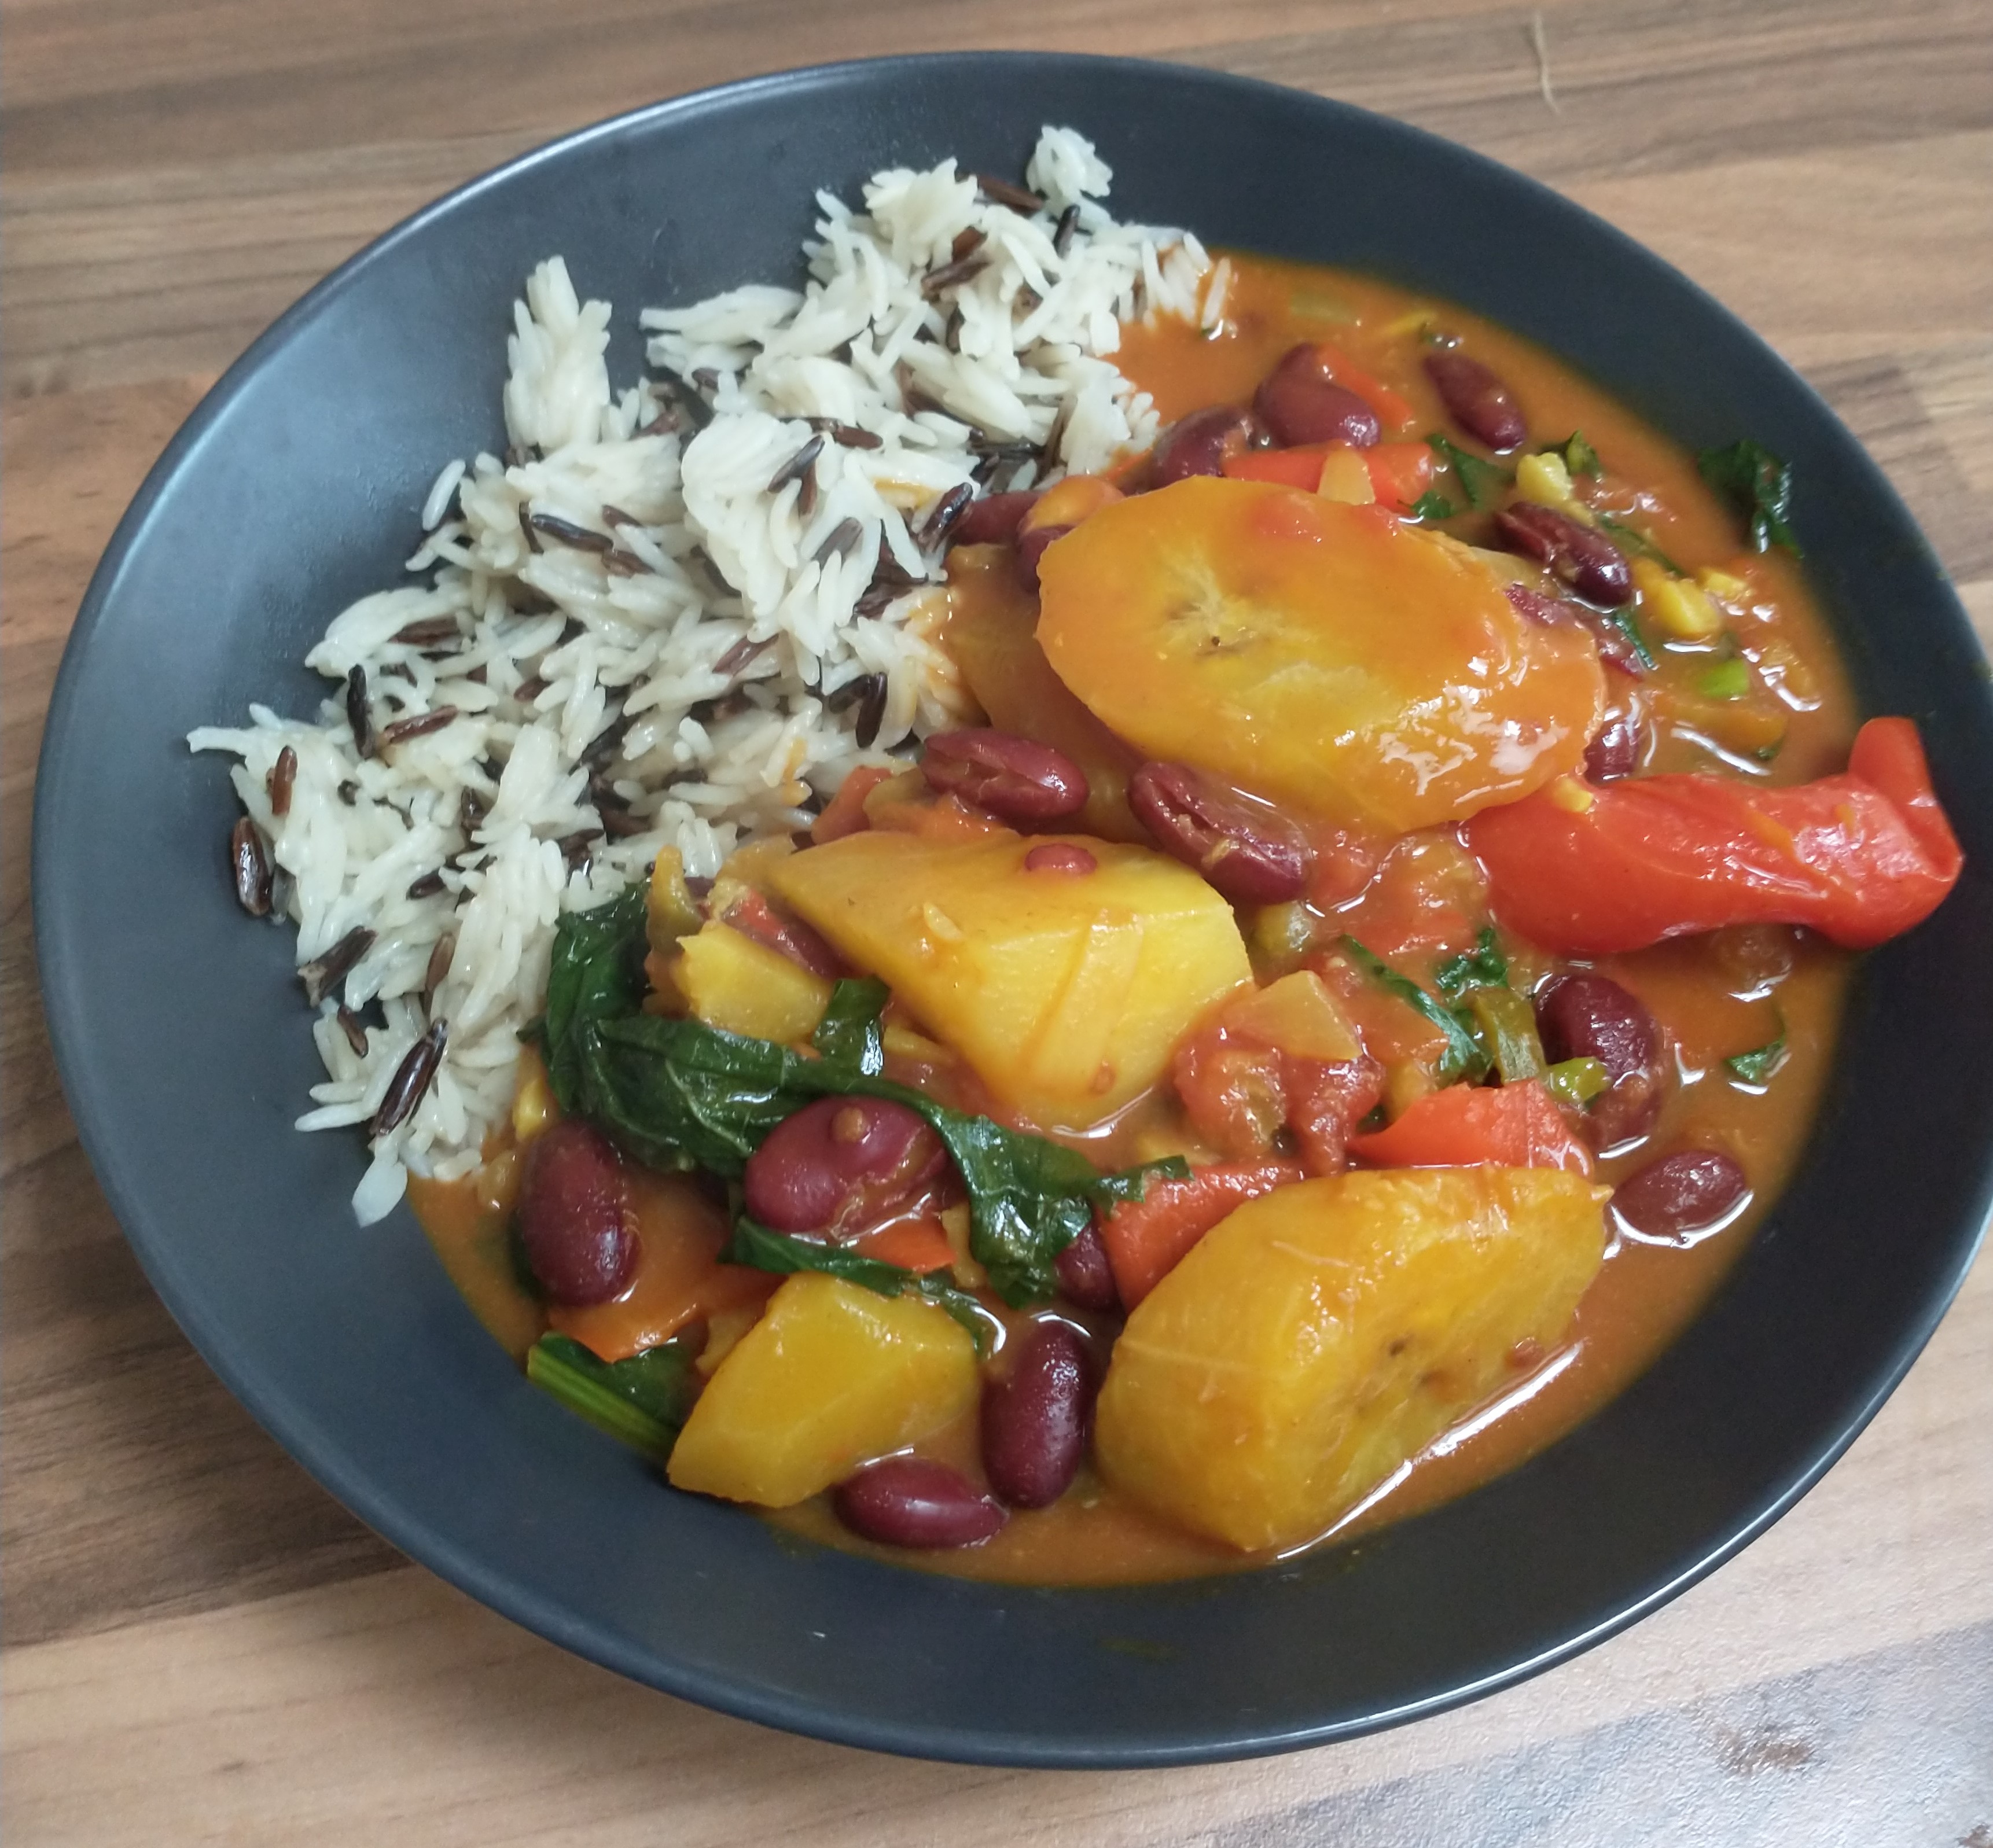 A picture of a flat bowl with wild rice, and a warm orange curry with visible plantain, peppers, spinach and kidney beans.